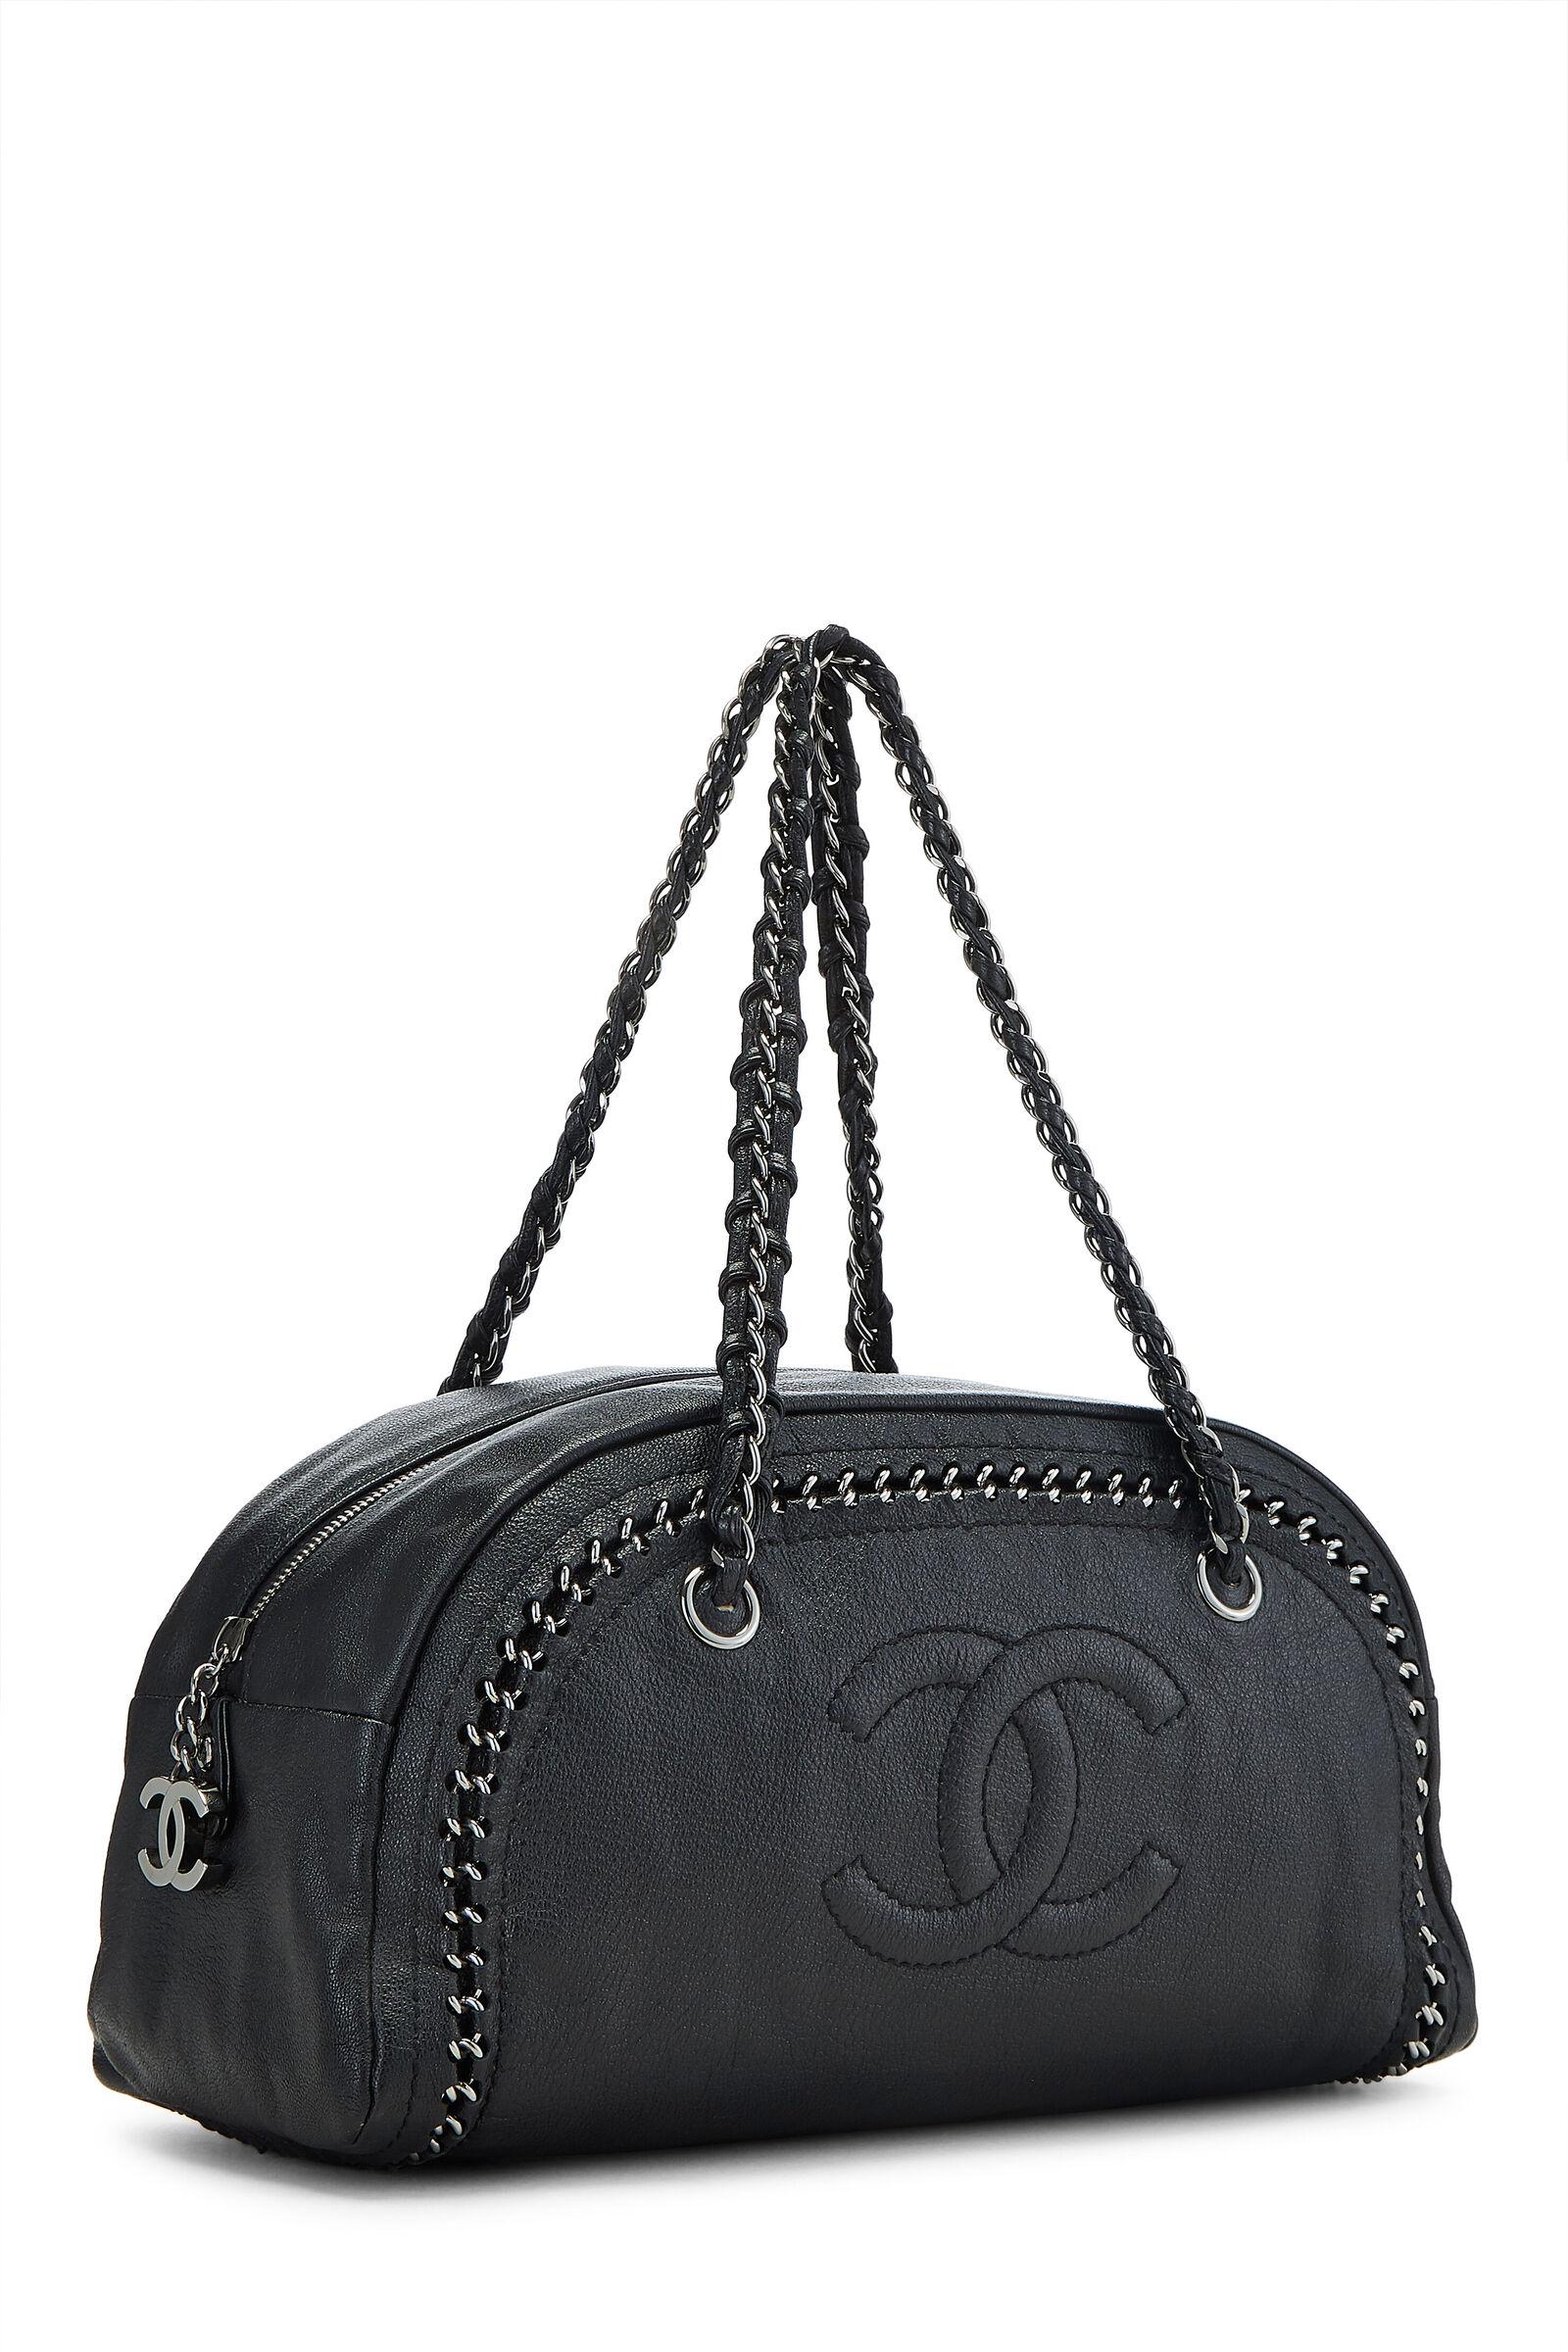 Chanel Black Bowling Bag Luxury Ligne Leather Lambskin Medium Satchel

Two Woven Chain-link And Leather Handles
Zip-around Closure
Interior Zip And Two Slip Pockets
Leather
Leather Lining
Gunmetal Hardware

Made in France